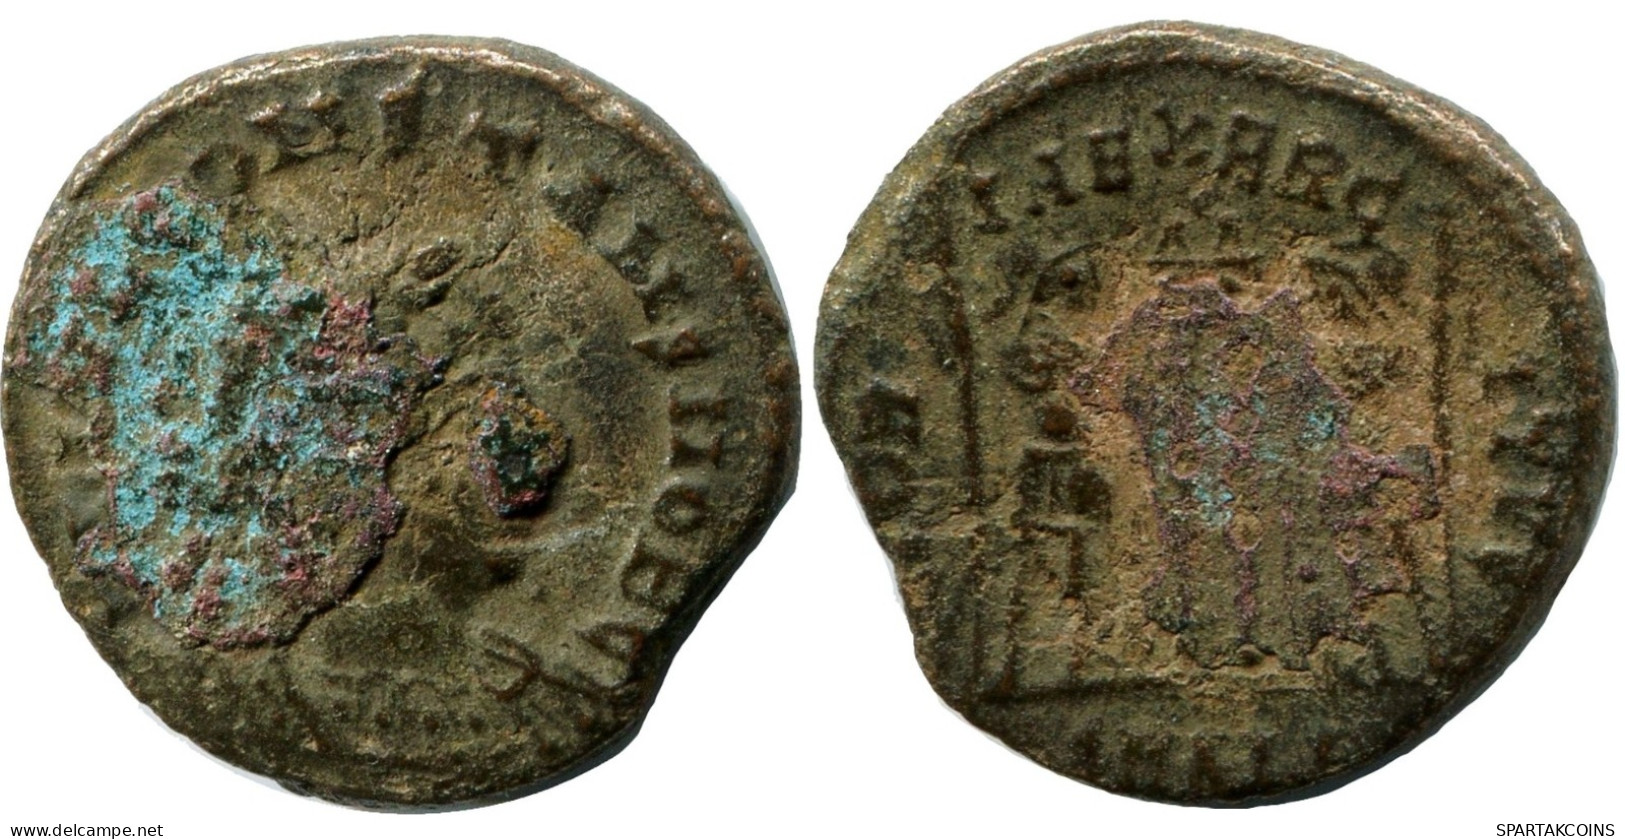 CONSTANS MINTED IN ALEKSANDRIA FROM THE ROYAL ONTARIO MUSEUM #ANC11327.14.D.A - L'Empire Chrétien (307 à 363)